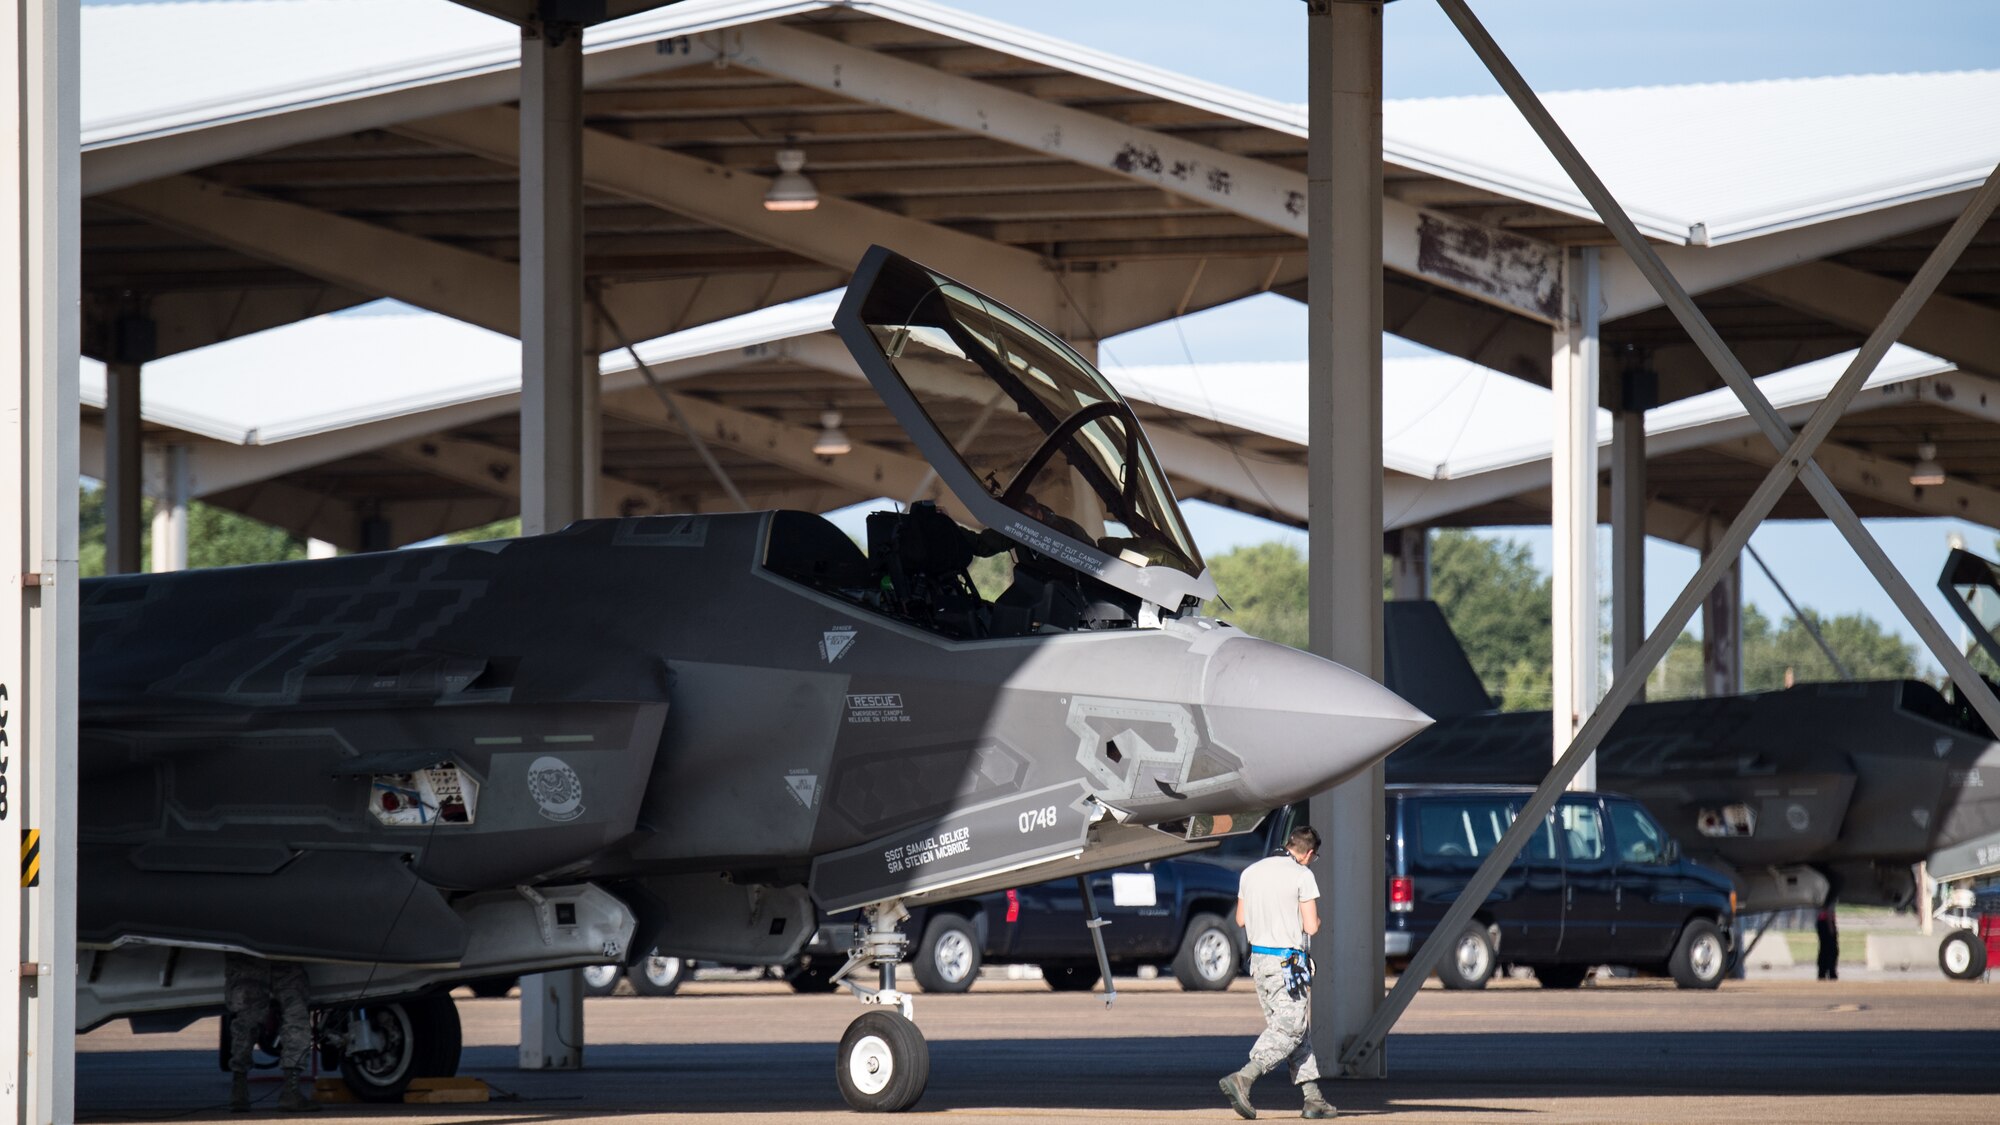 Aircrew from Eglin Air Force Base, Fla., prepare an F-35 Lightning for takeoff at Barksdale Air Force Base, La., Oct. 12, 2018. The aircraft evacuated to Barksdale to avoid possible damage from Hurricane Michael. (U.S. Air Force photo by Airman 1st Class Lillian Miller)